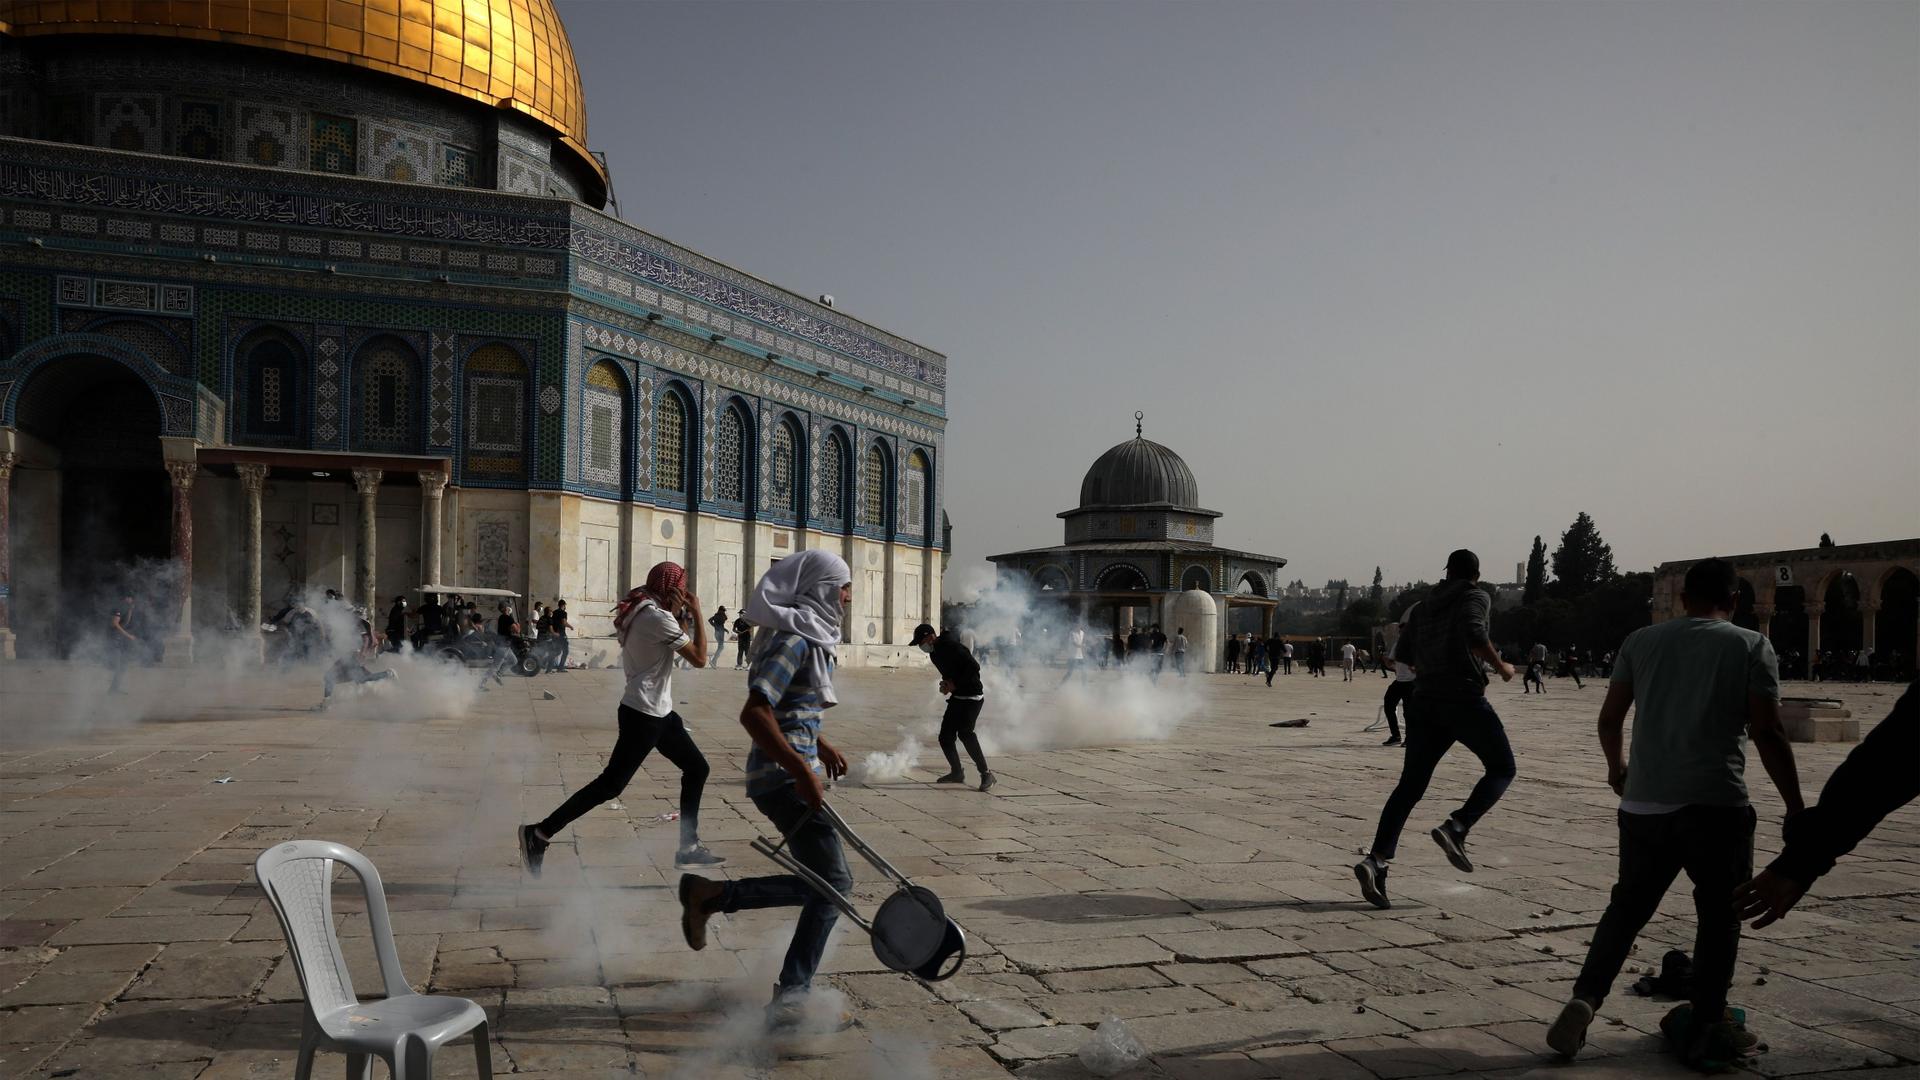 Palestinians run away from tear gas during clashes with Israeli security forces at the Al-Aqsa Mosque compound in Jerusalem's Old City Monday, May 10, 2021.